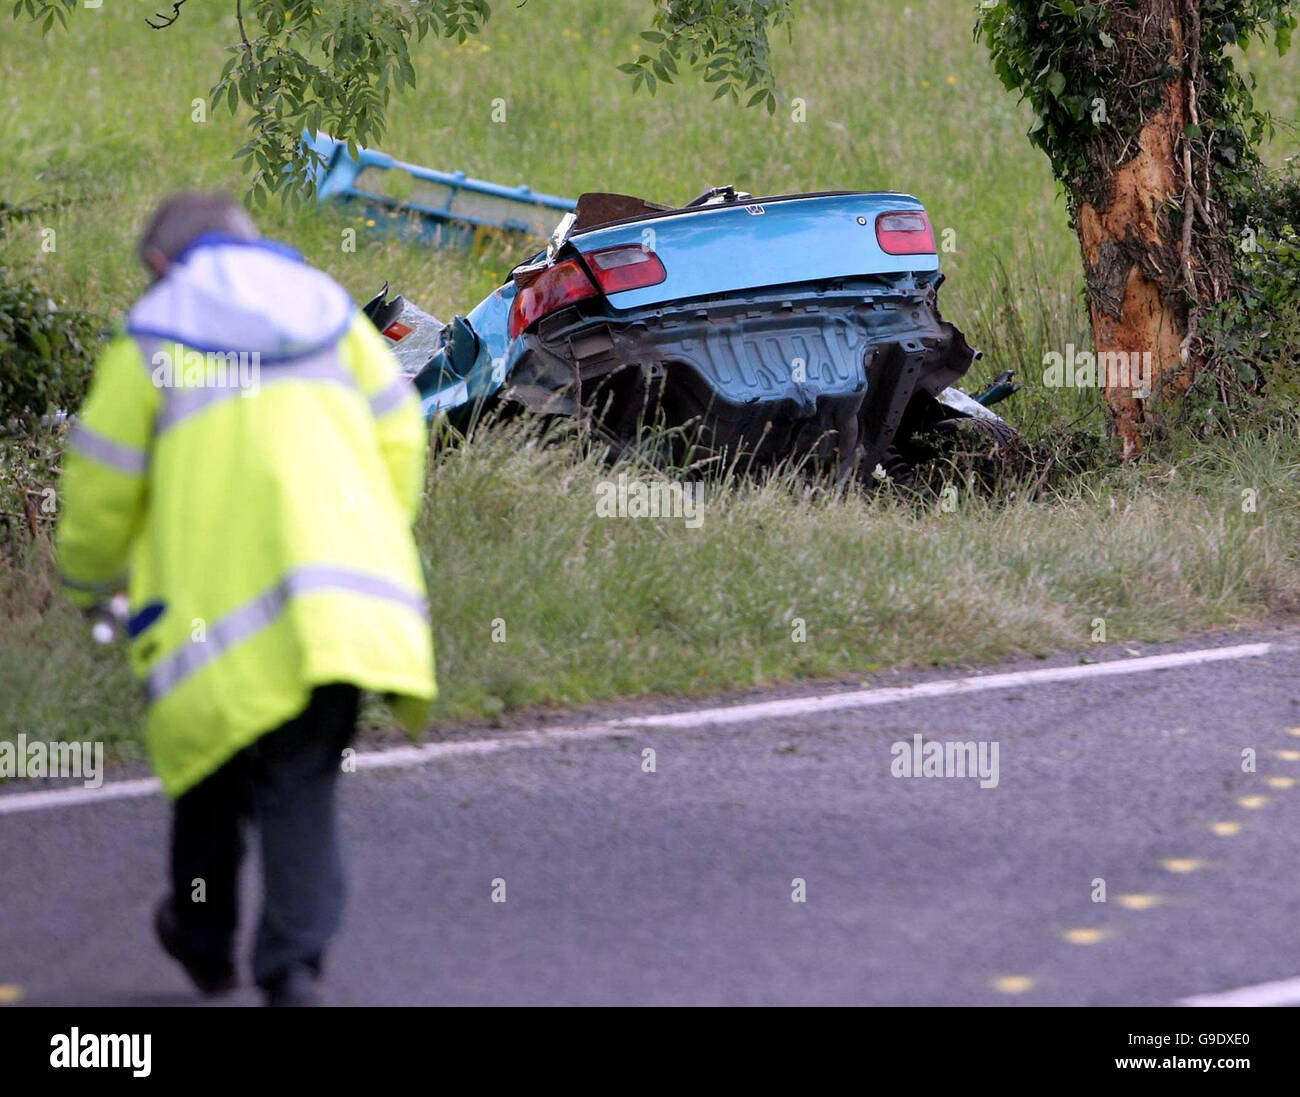 The Honda Civic car in which four young people died when the car they were travelling in smashed into a tree in Ulster . Stock Photo